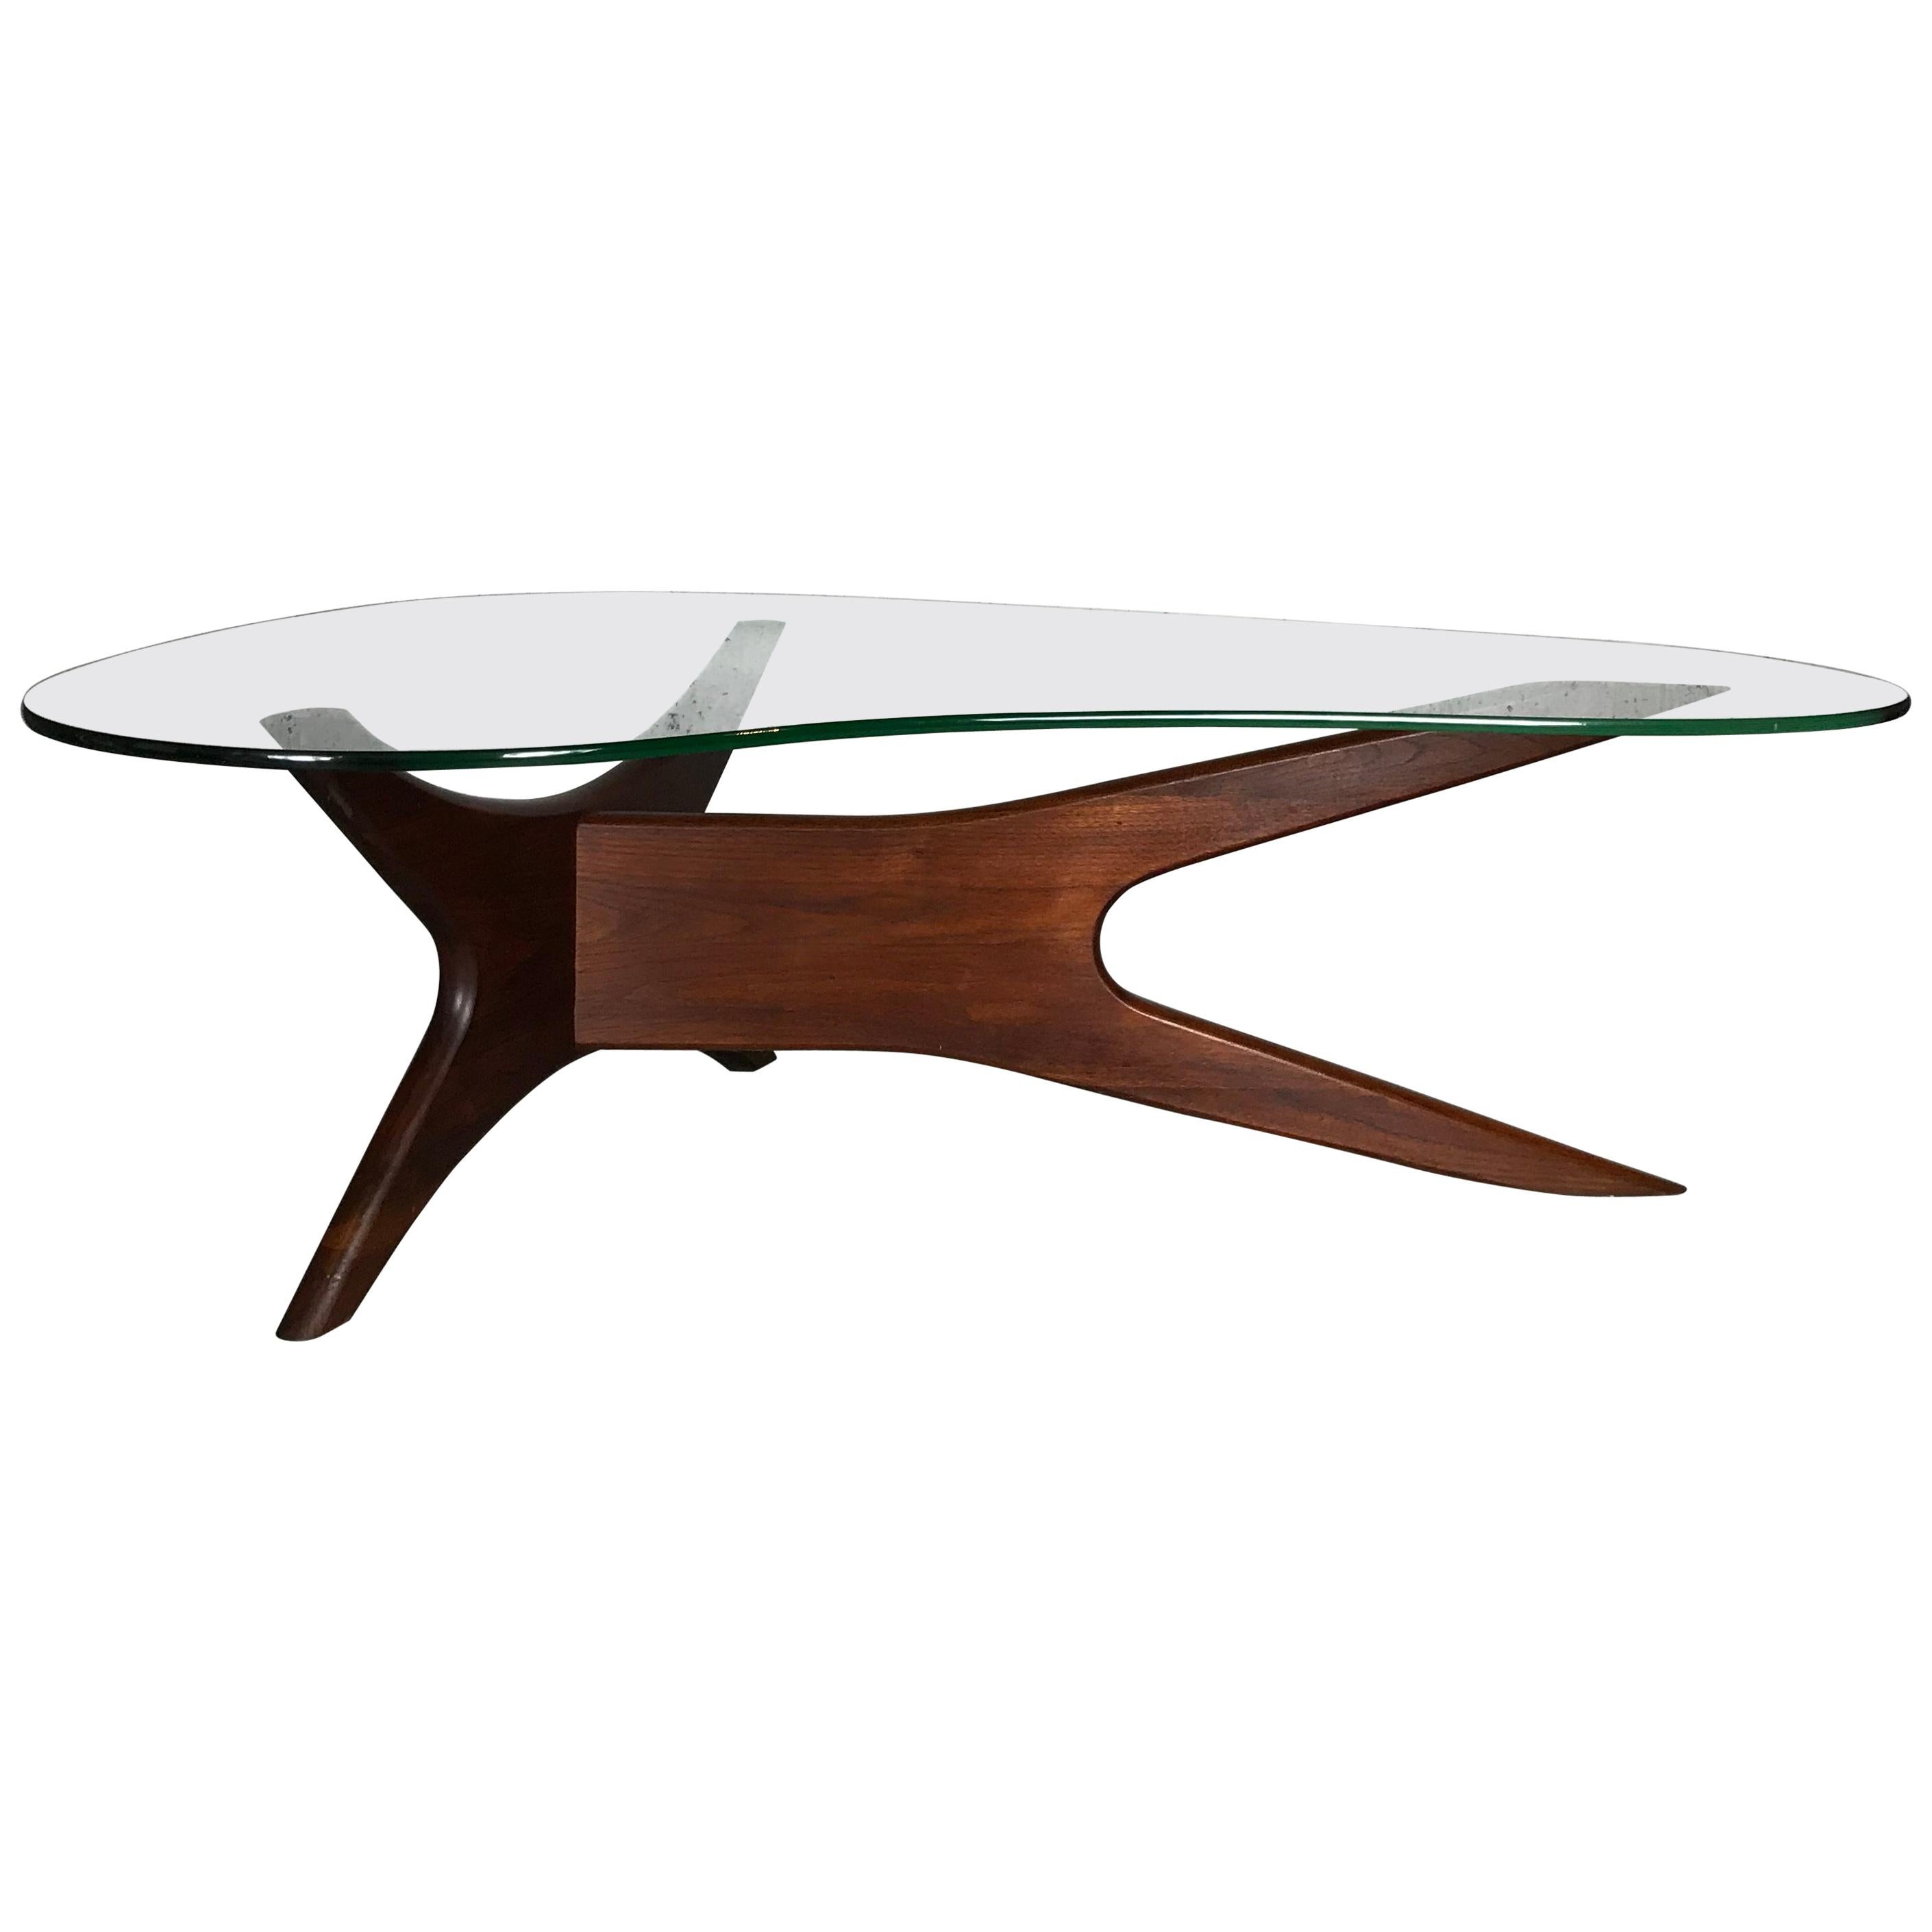 Sculptural Cocktail Table by Adrian Pearsall for Craft Associates